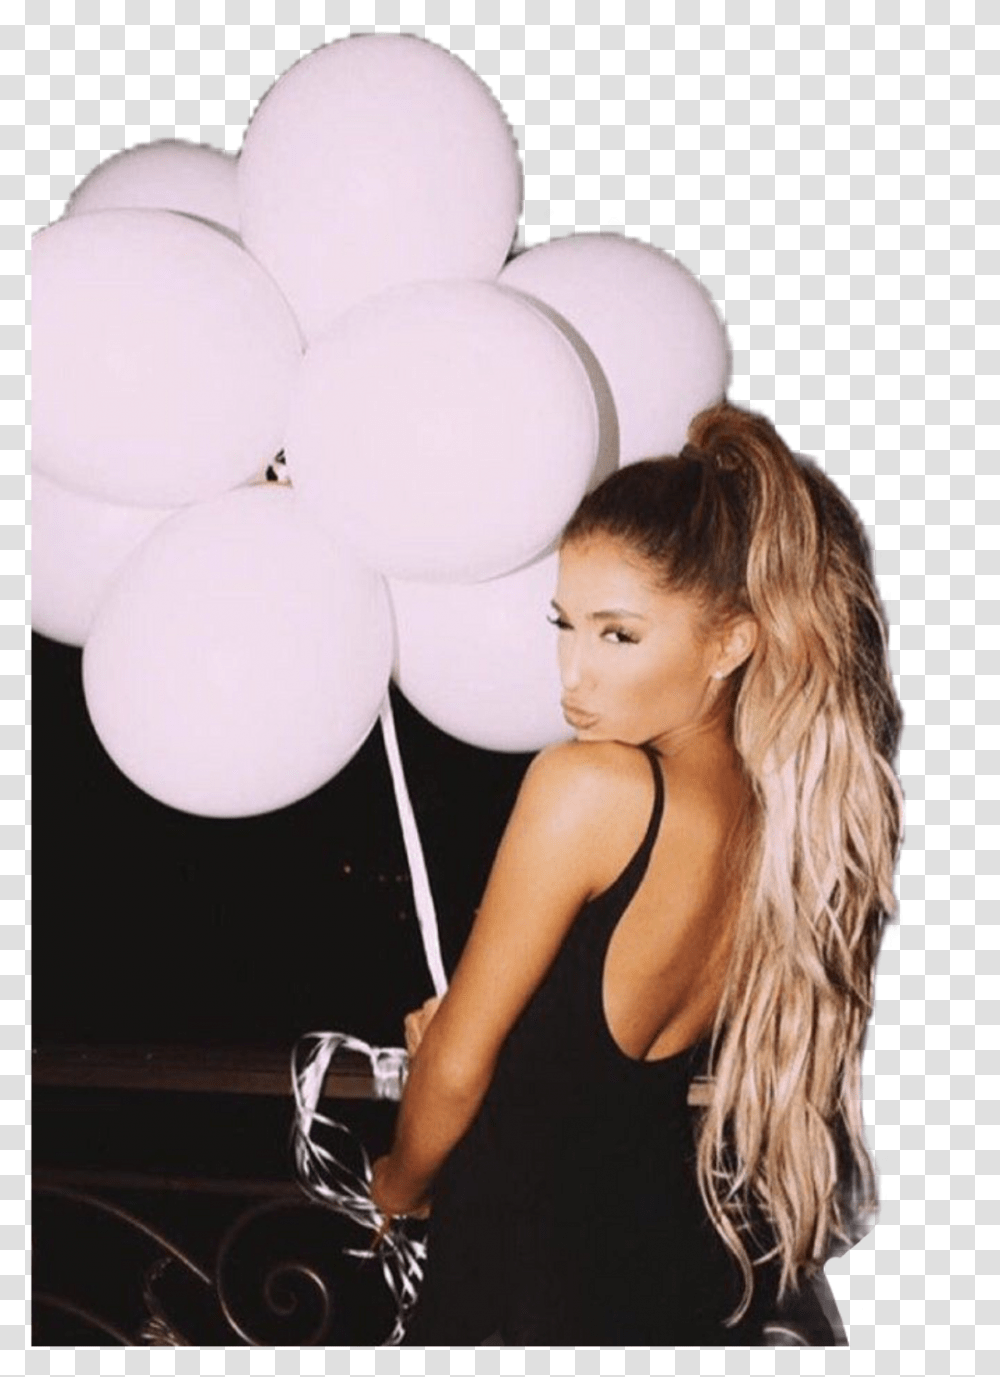 Download Hd Report Abuse Ariana Grande On Her Birthday Ariana Grande Birthday, Balloon, Person, Human, Female Transparent Png